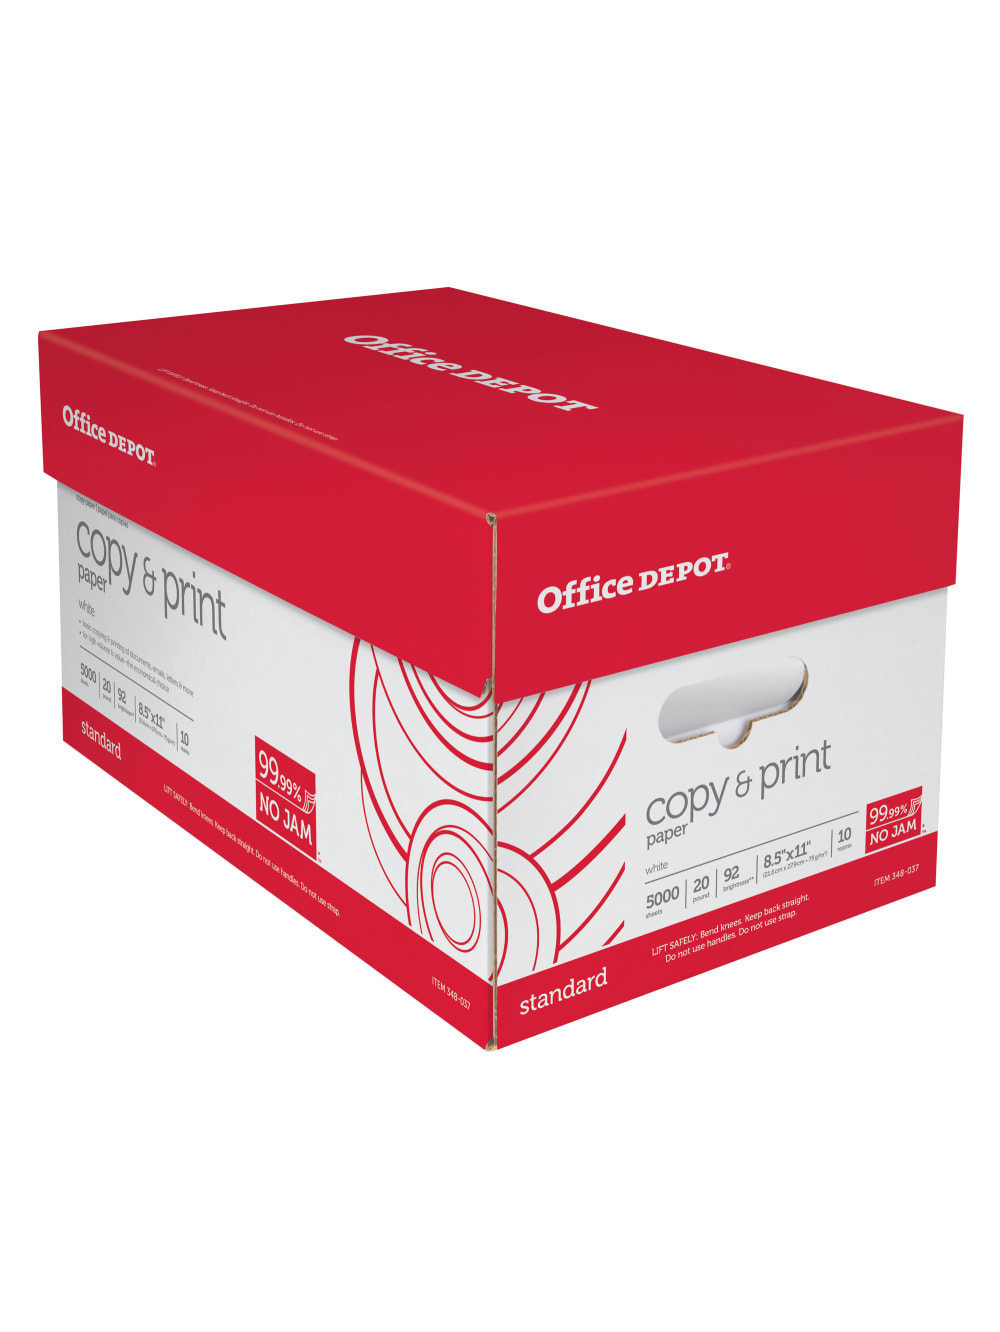 Office Depot 10-ream case of paper $37.99+tax in-store or online